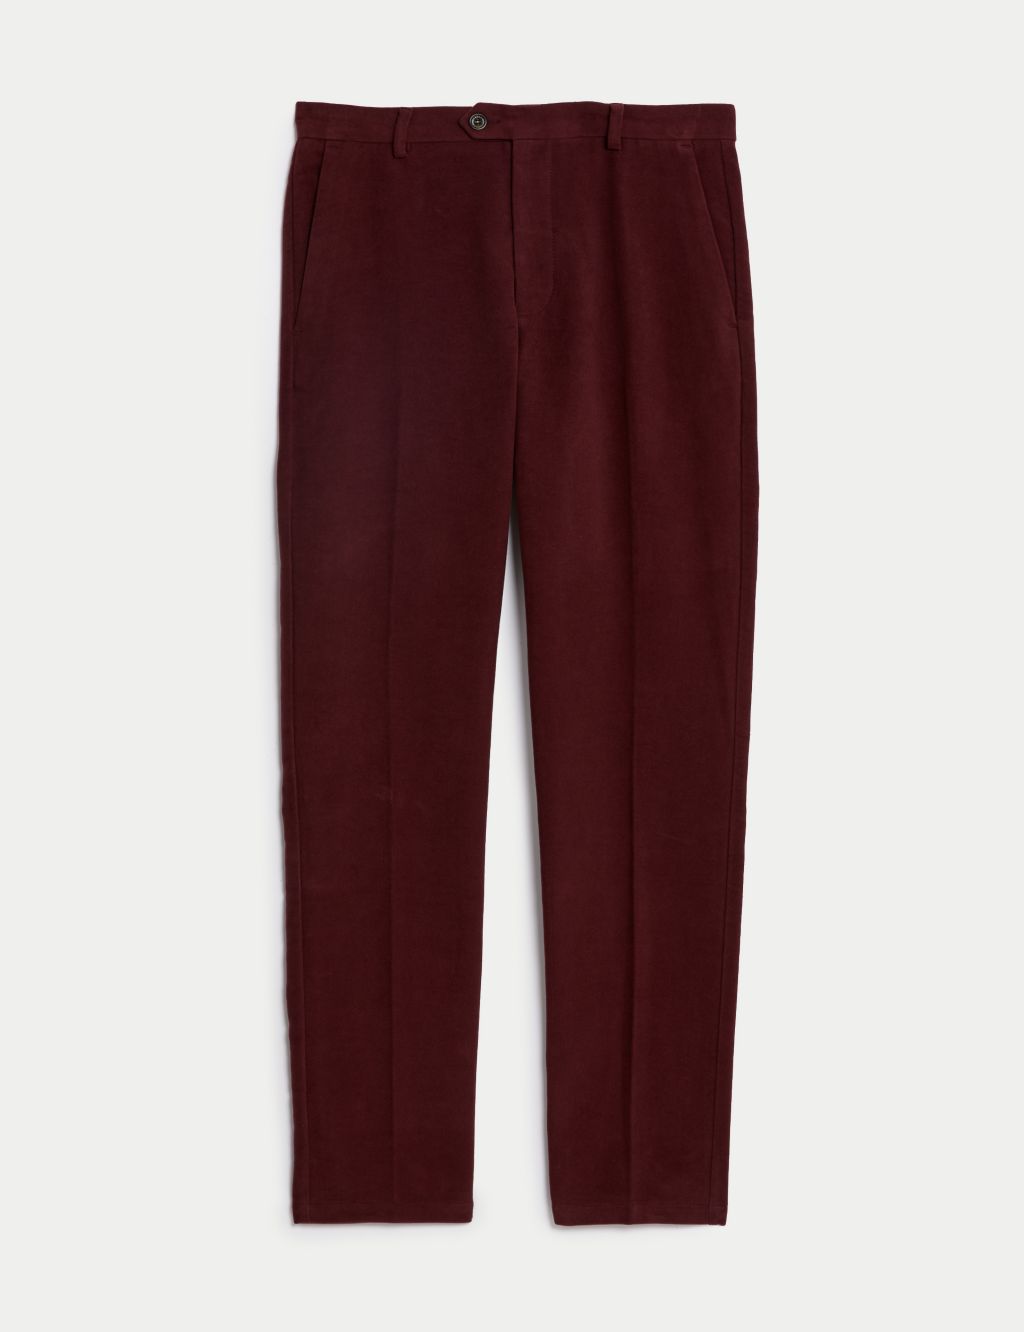 Tapered Fit Moleskin Flat Front Trousers image 1